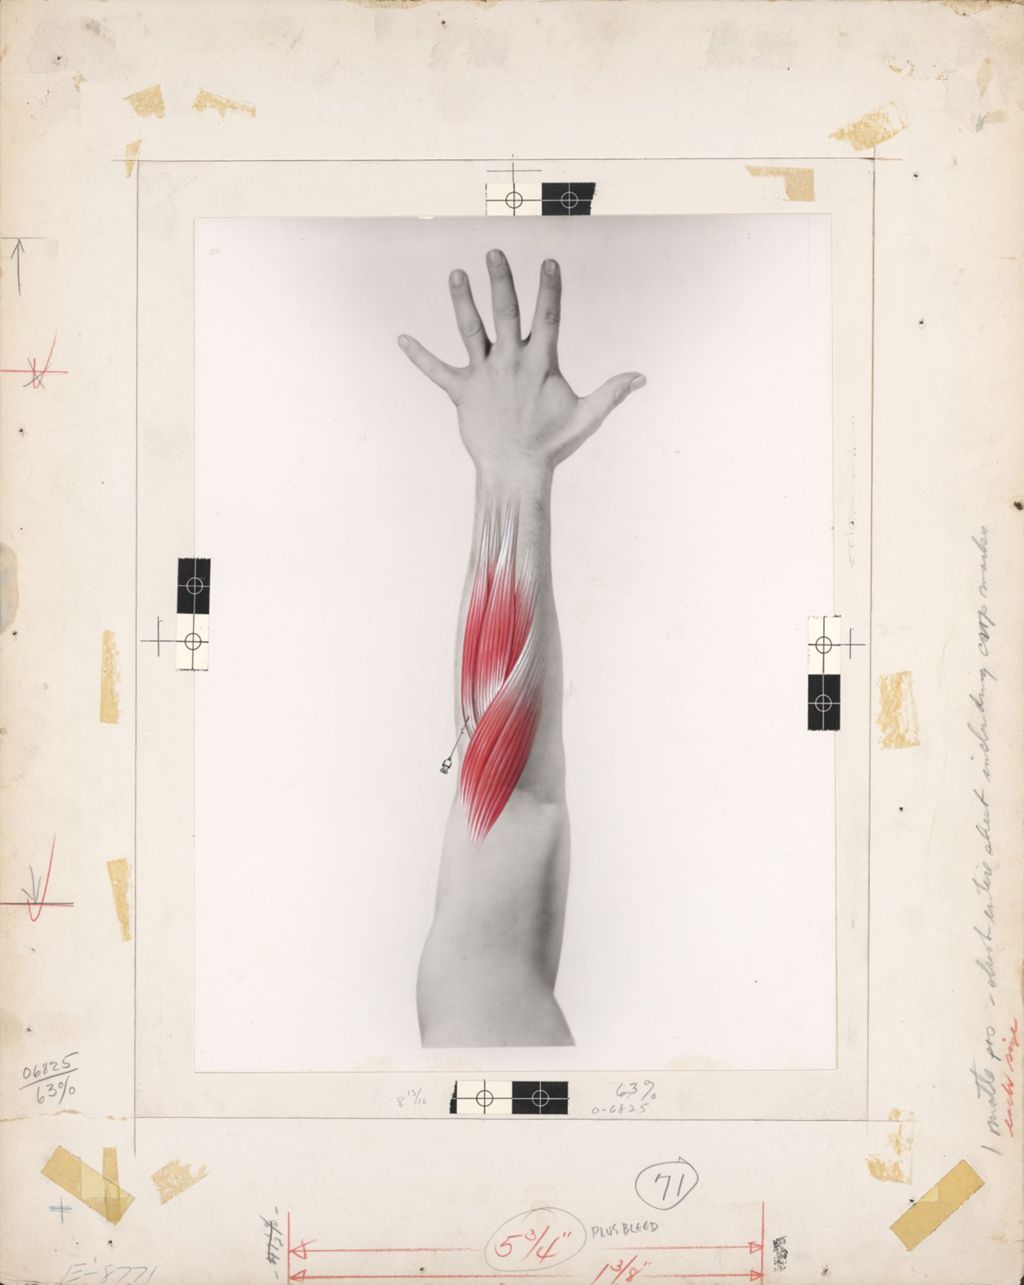 Miniature of Drawing on top of photograph of man's arm, showing needle insertion point in forearm muscle